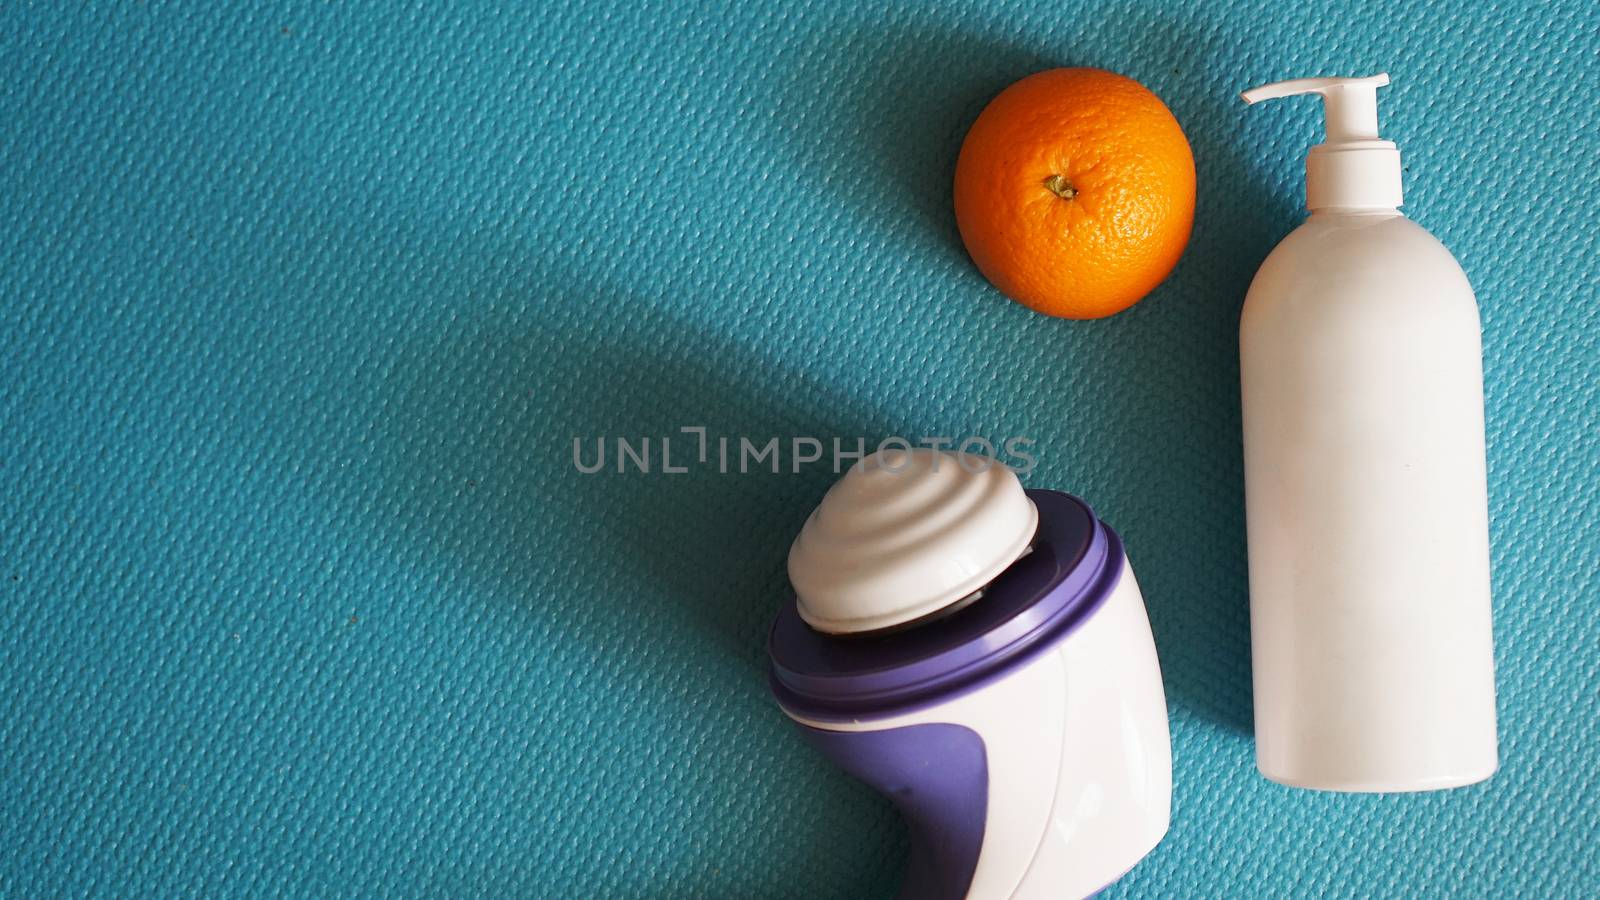 Electric massager for cellulite. Lotion, orange and anti-cellulite massager by natali_brill